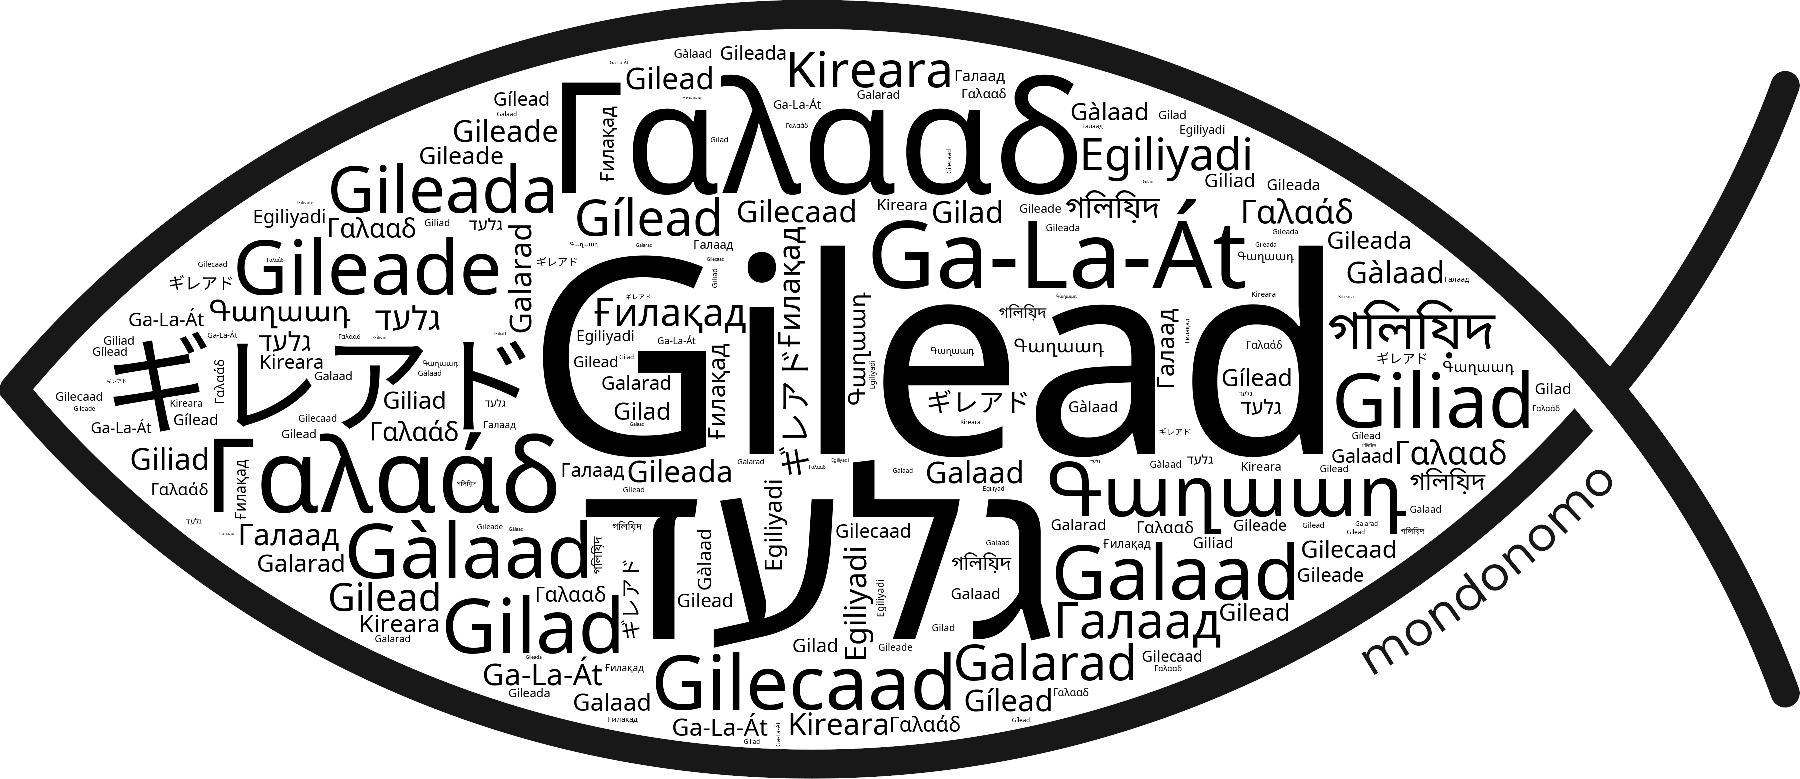 Name Gilead in the world's Bibles